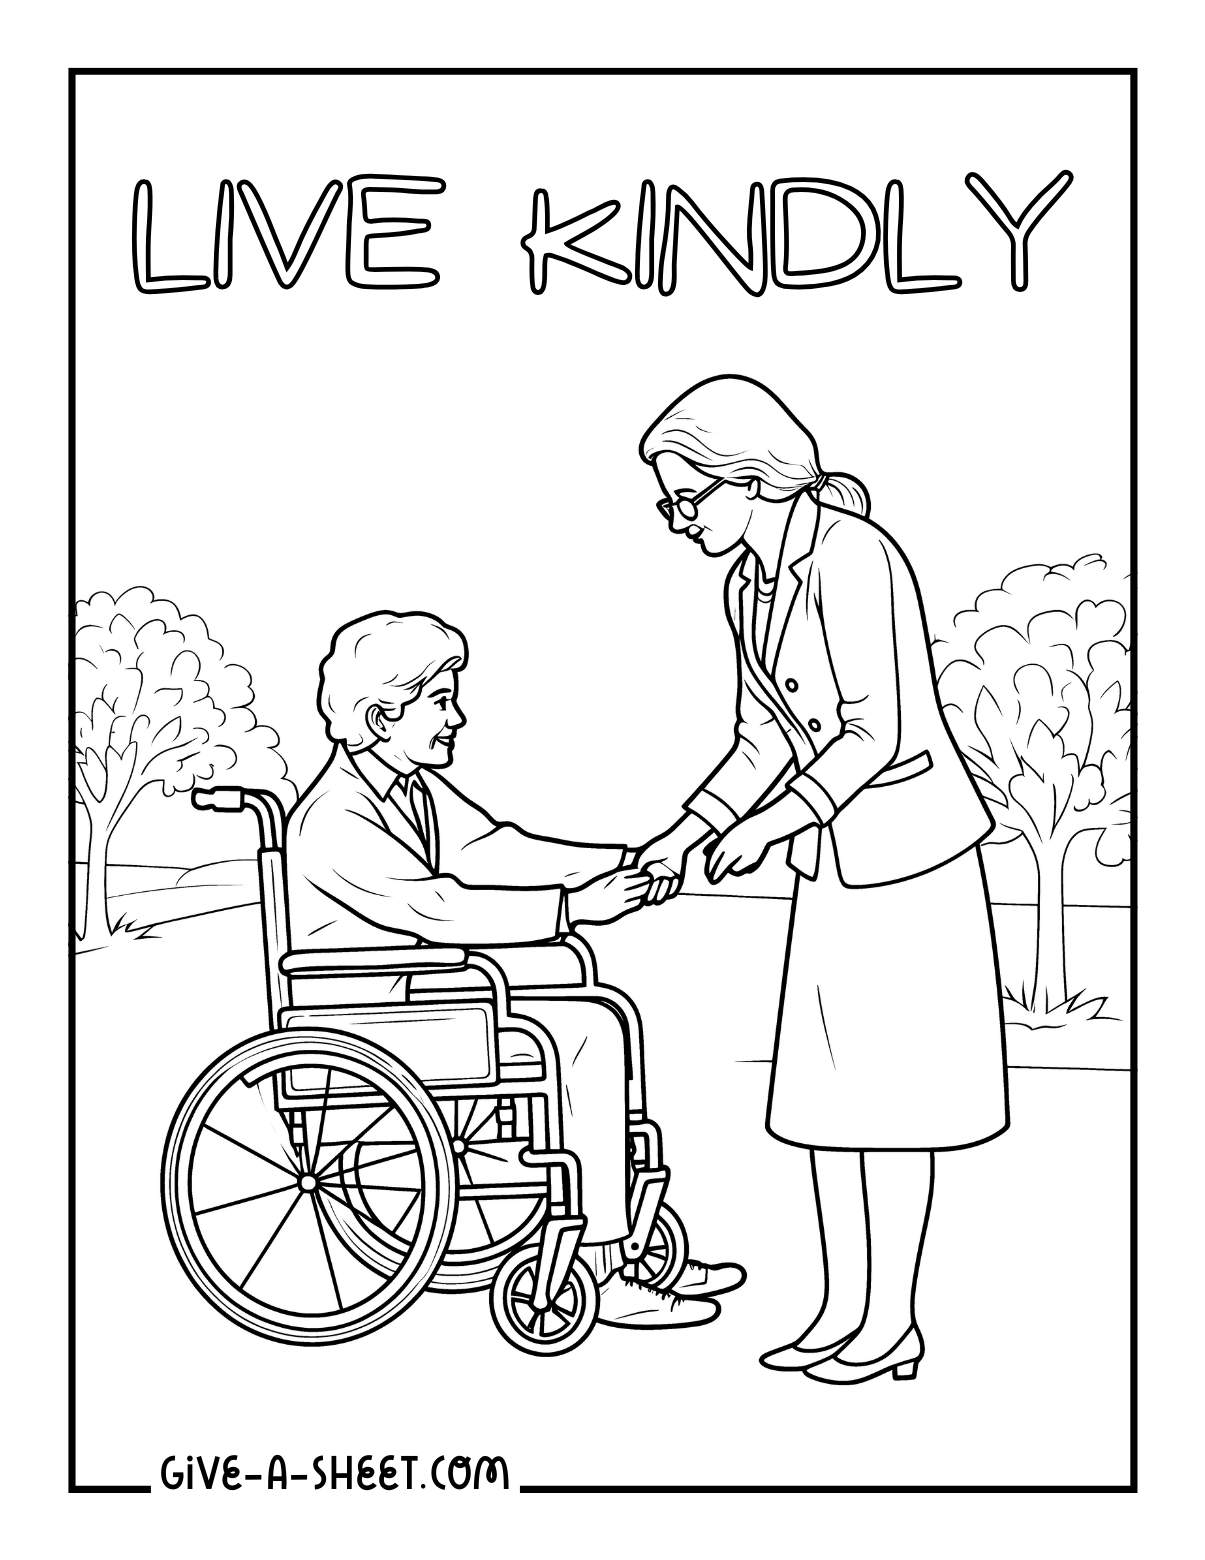 Examples of kindness coloring page.